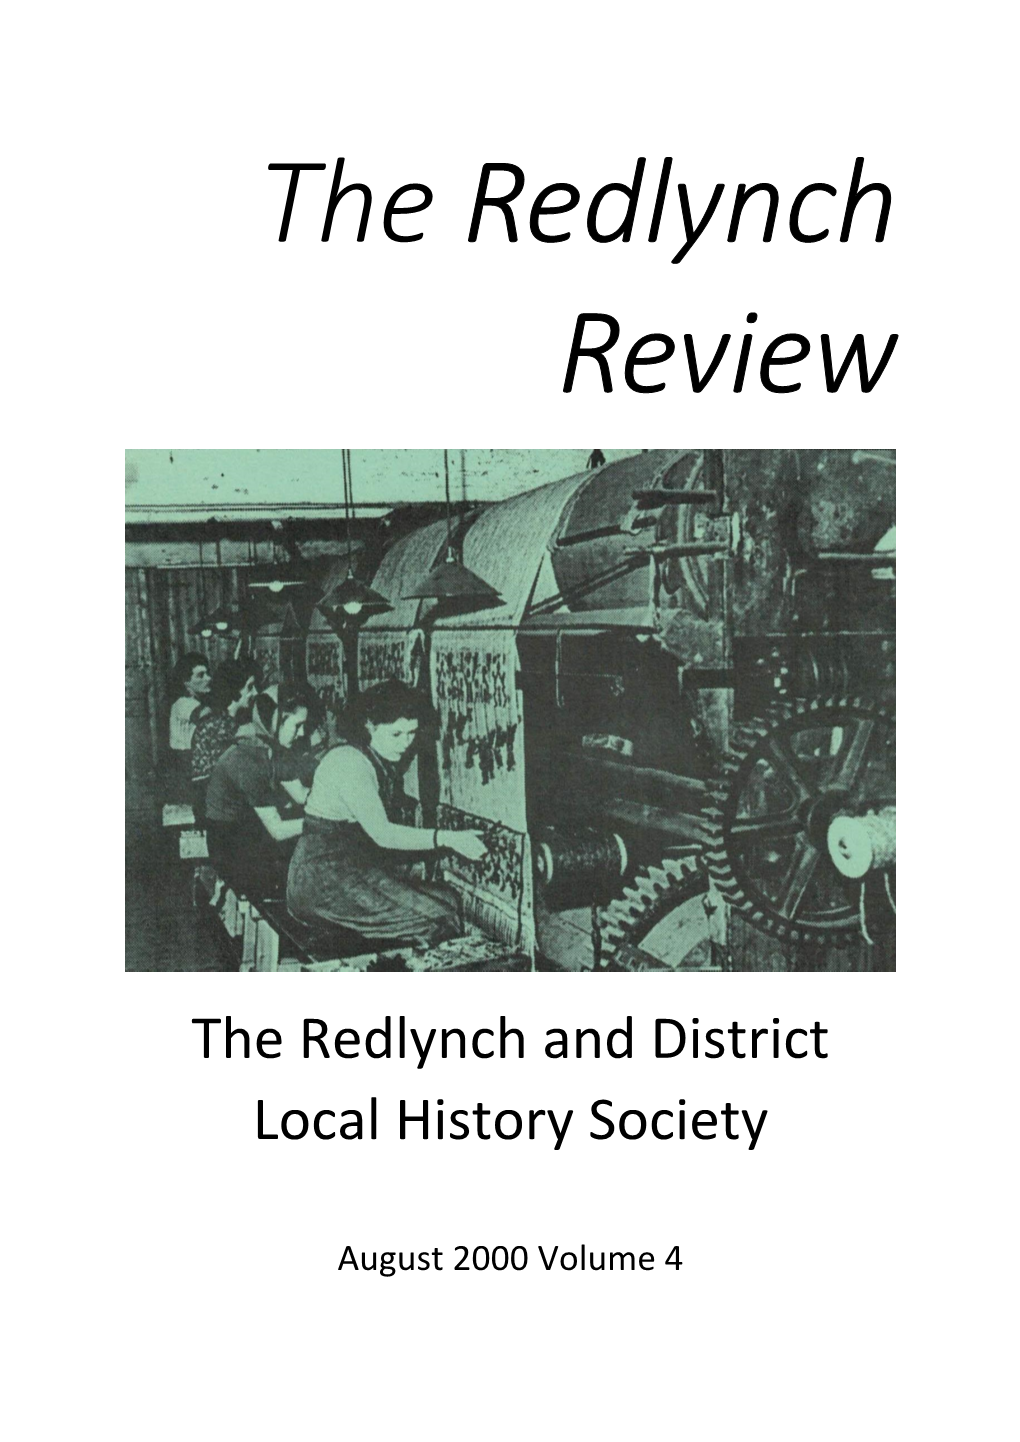 The Redlynch and District Local History Society